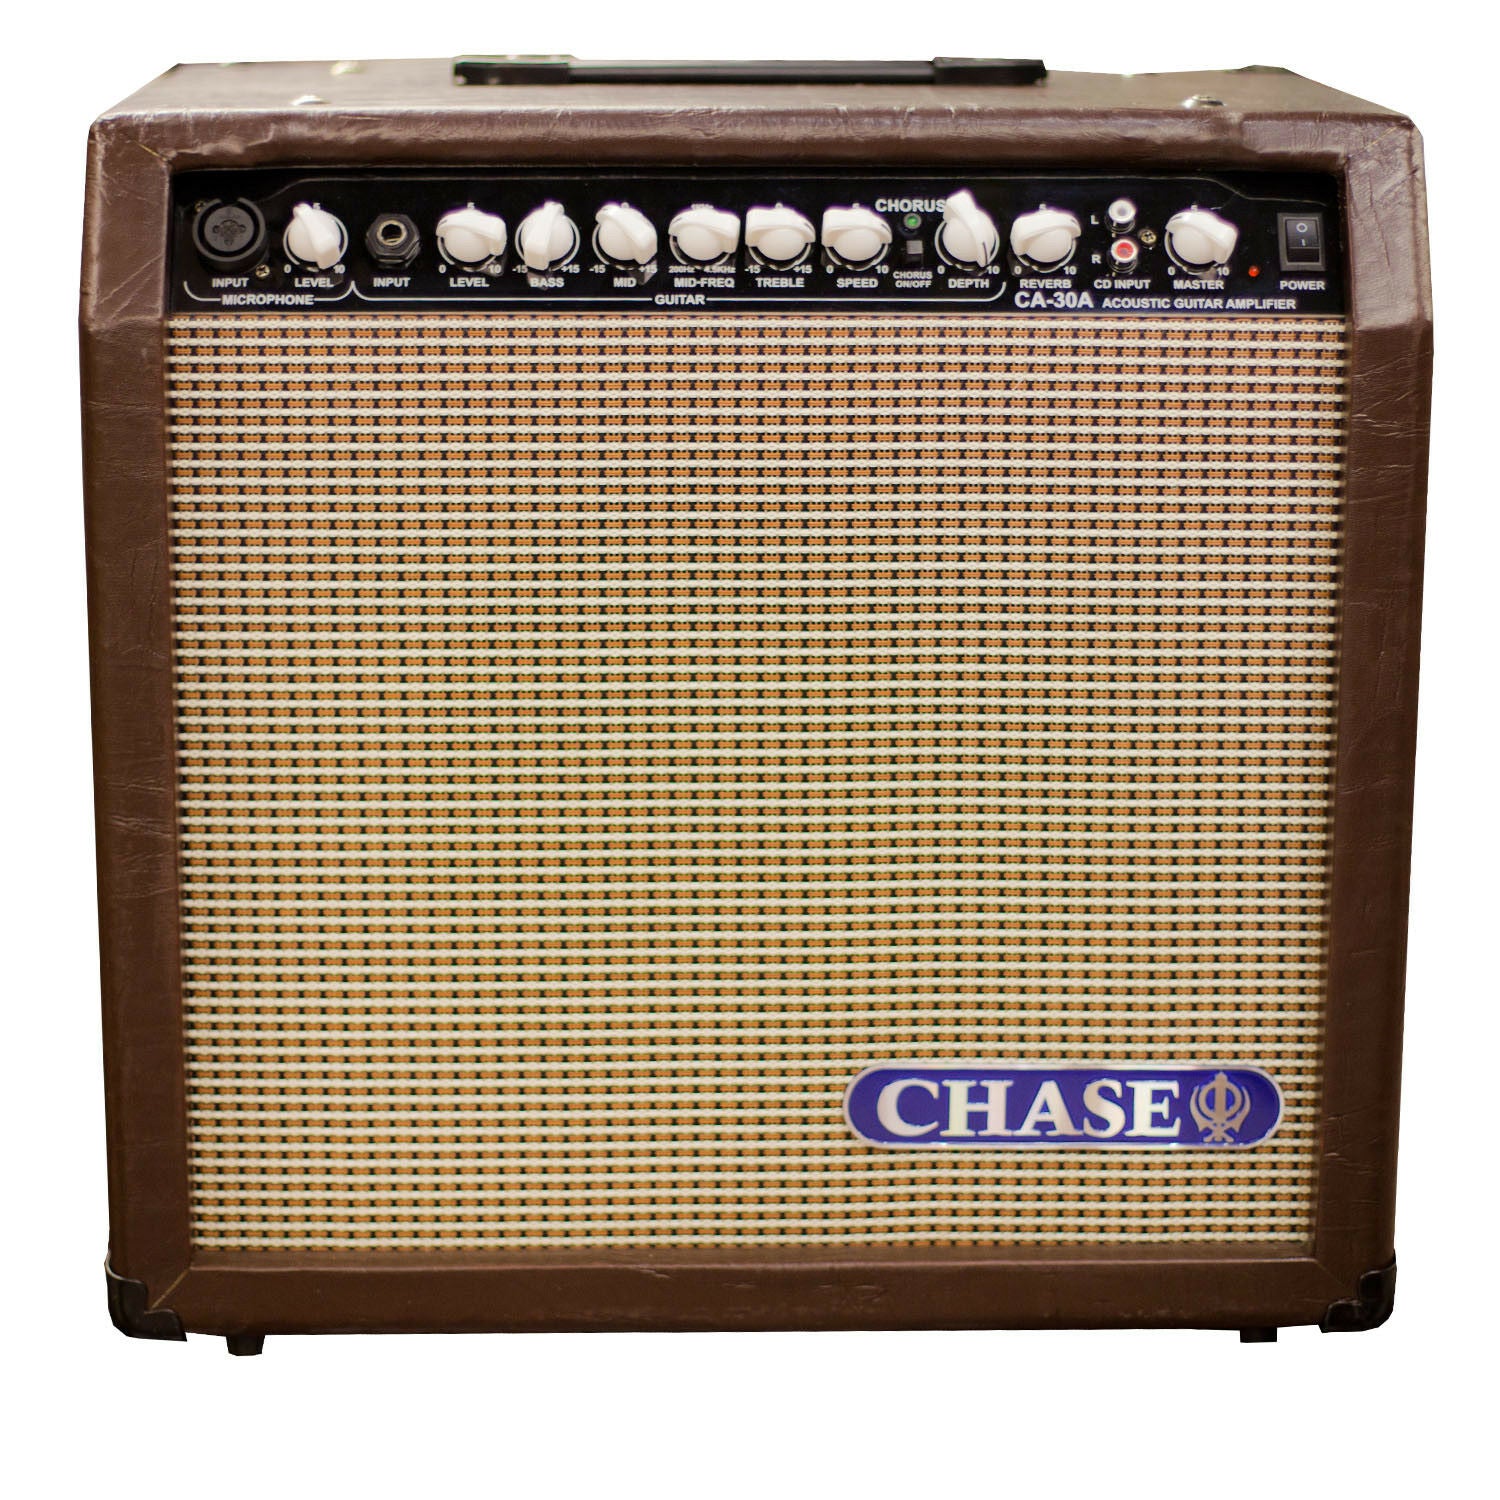 Chase Acoustic Guitar Amplifier | Chase CA-30A 30 Watt Acoustic Guitar Amp